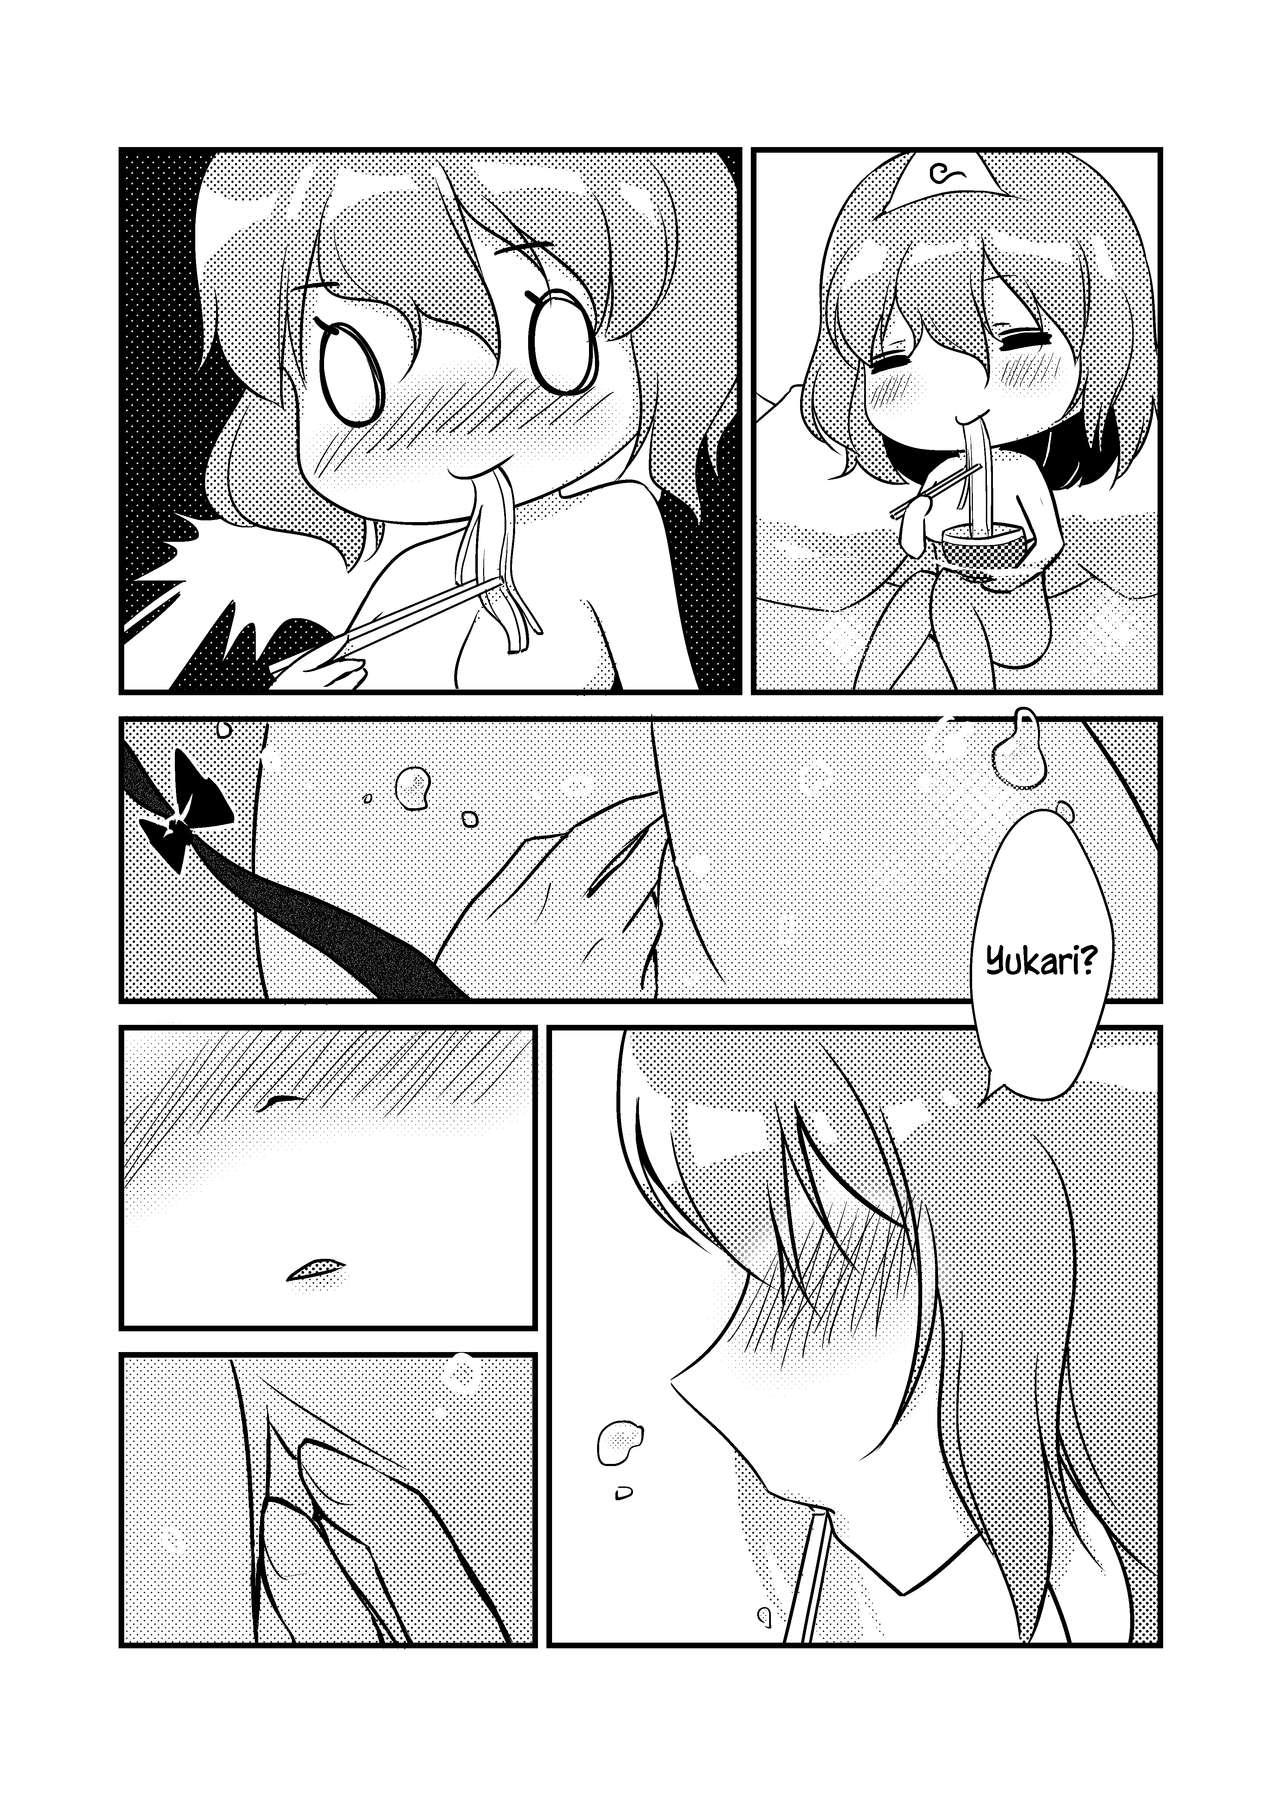 Dyke ????一起泡温泉吧！ | ????Let's Soak in the Hot Spring! - Touhou project Abuse - Page 5